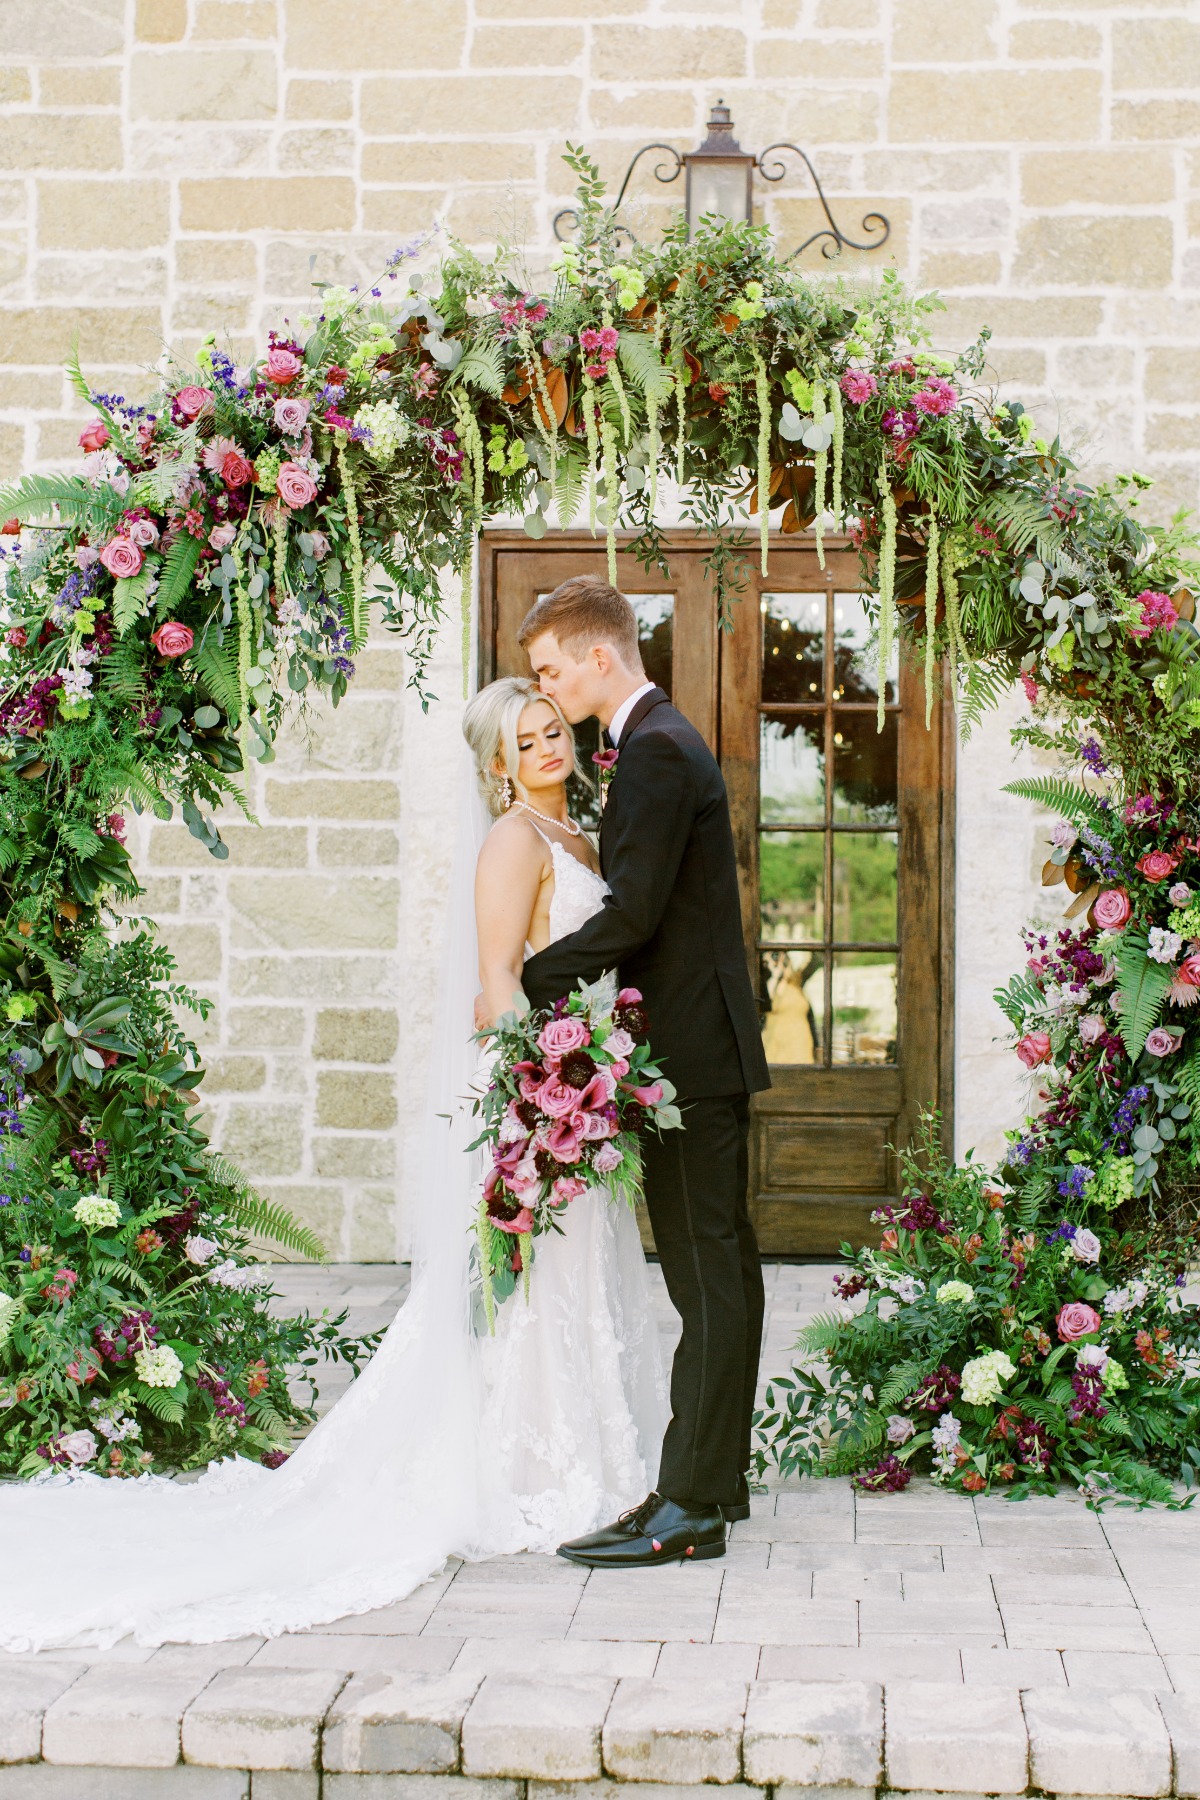 A Heartwarming Rustic Wedding Honoring the Bride’s Late Father and Brother